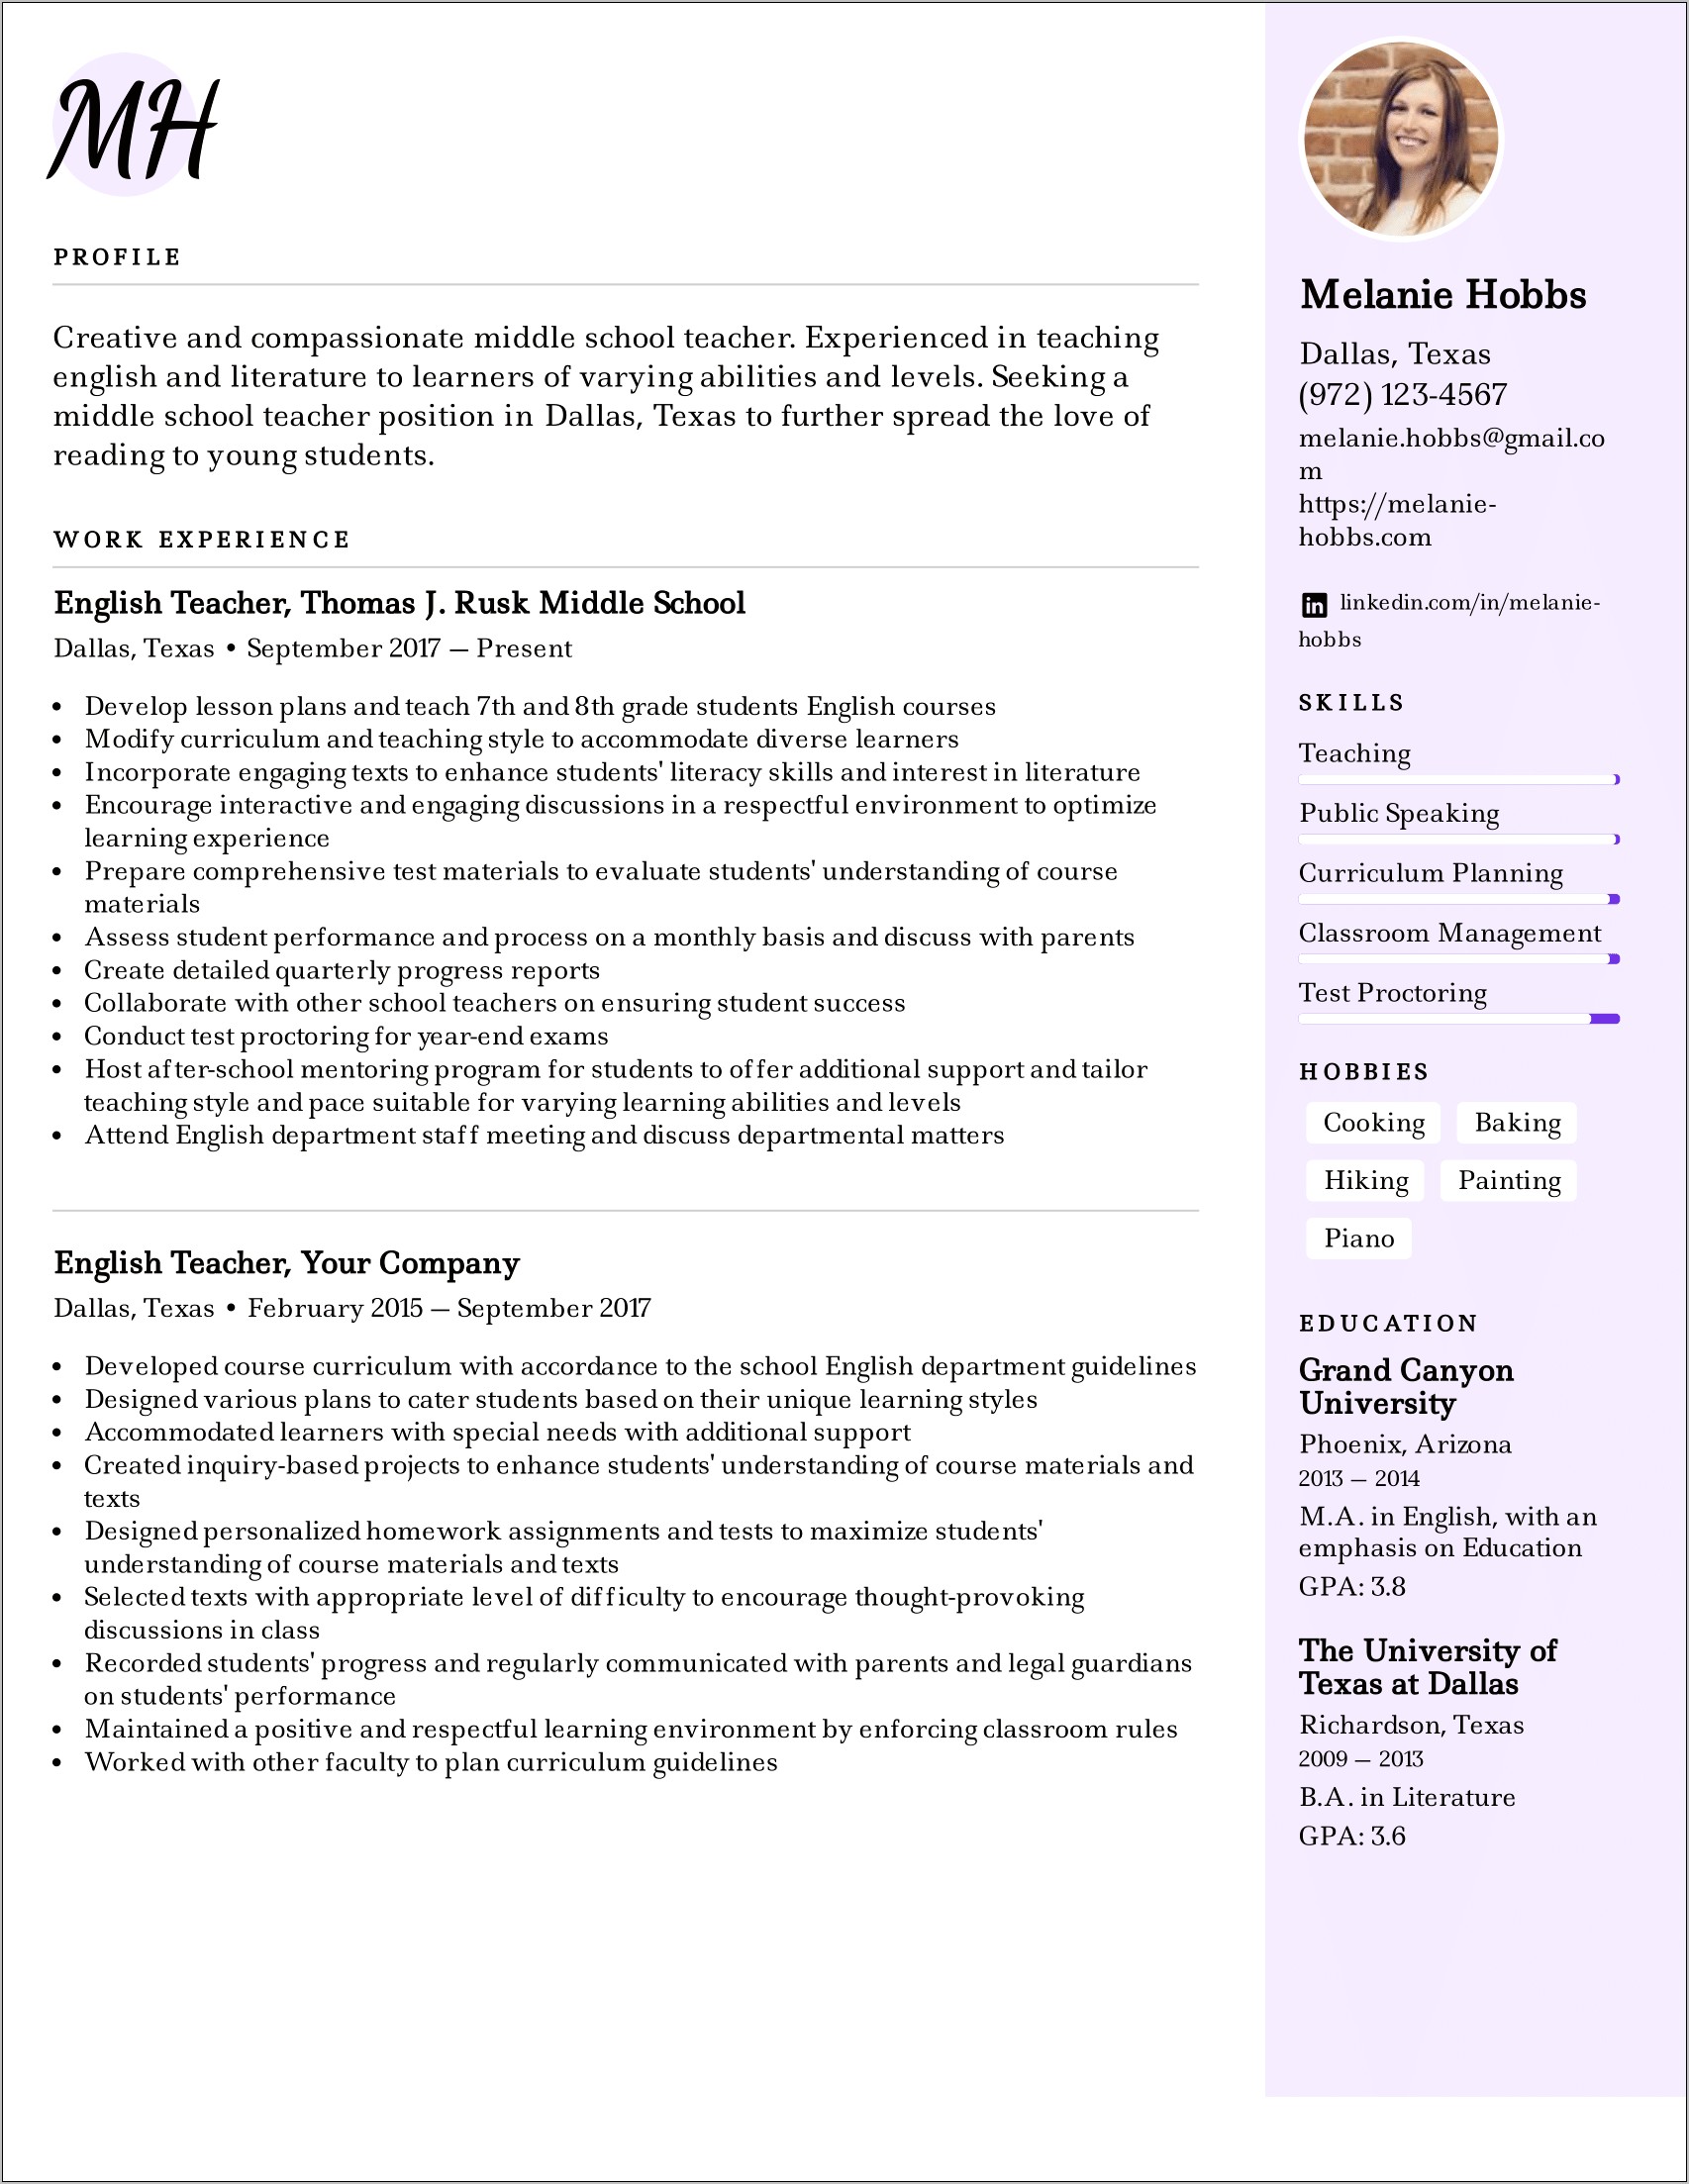 Resume Skills And Abilities For Teacher